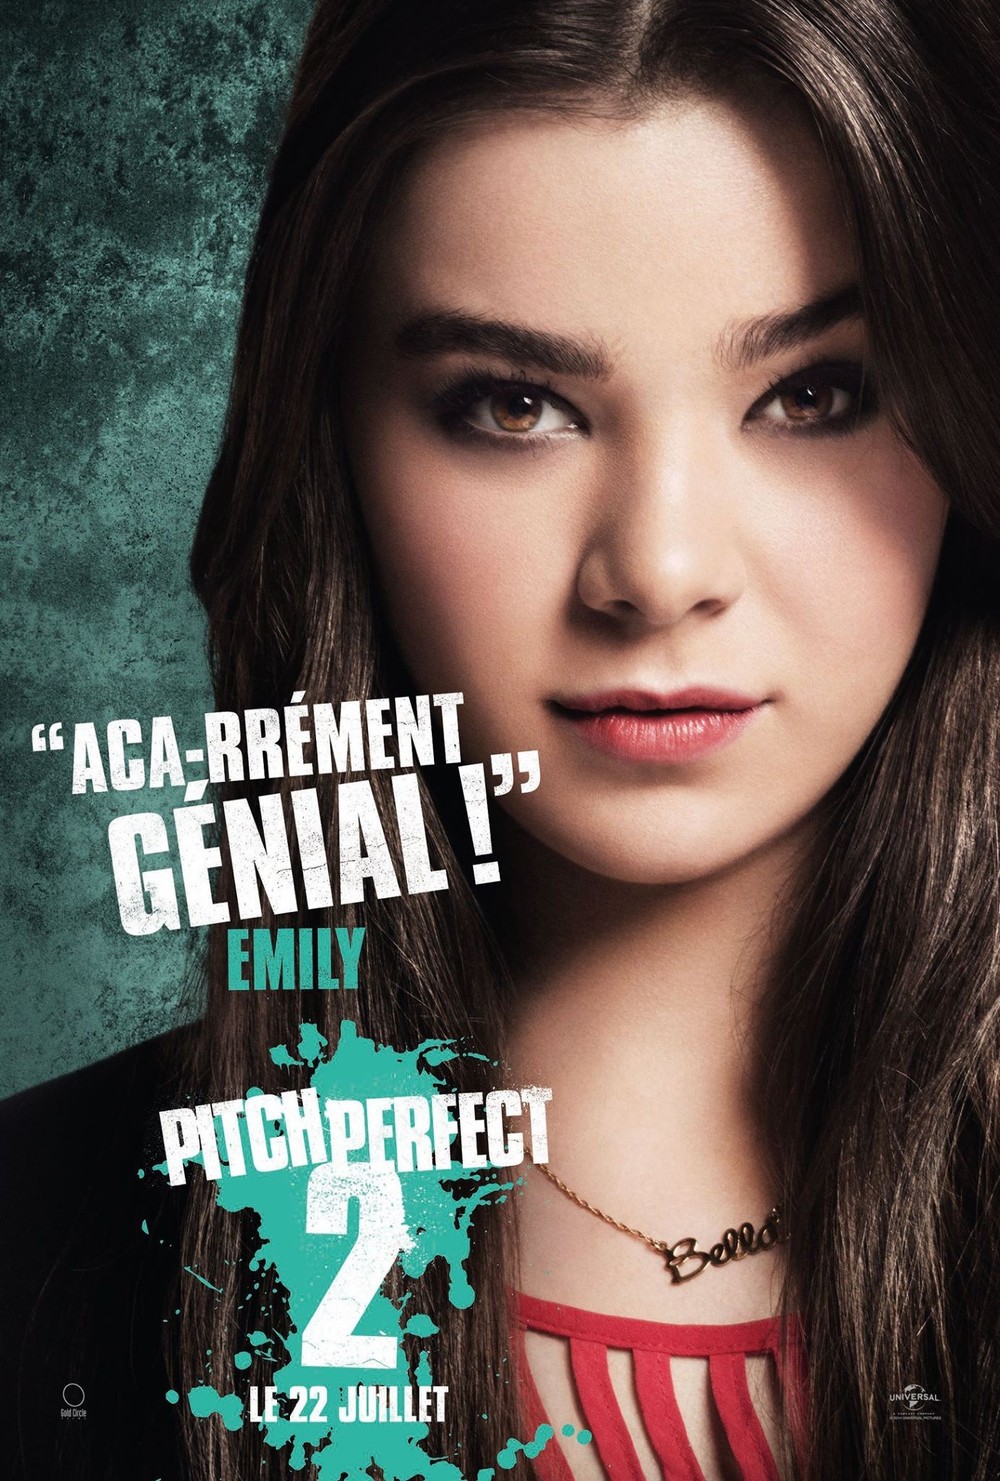 Pitch perfect dvd release date